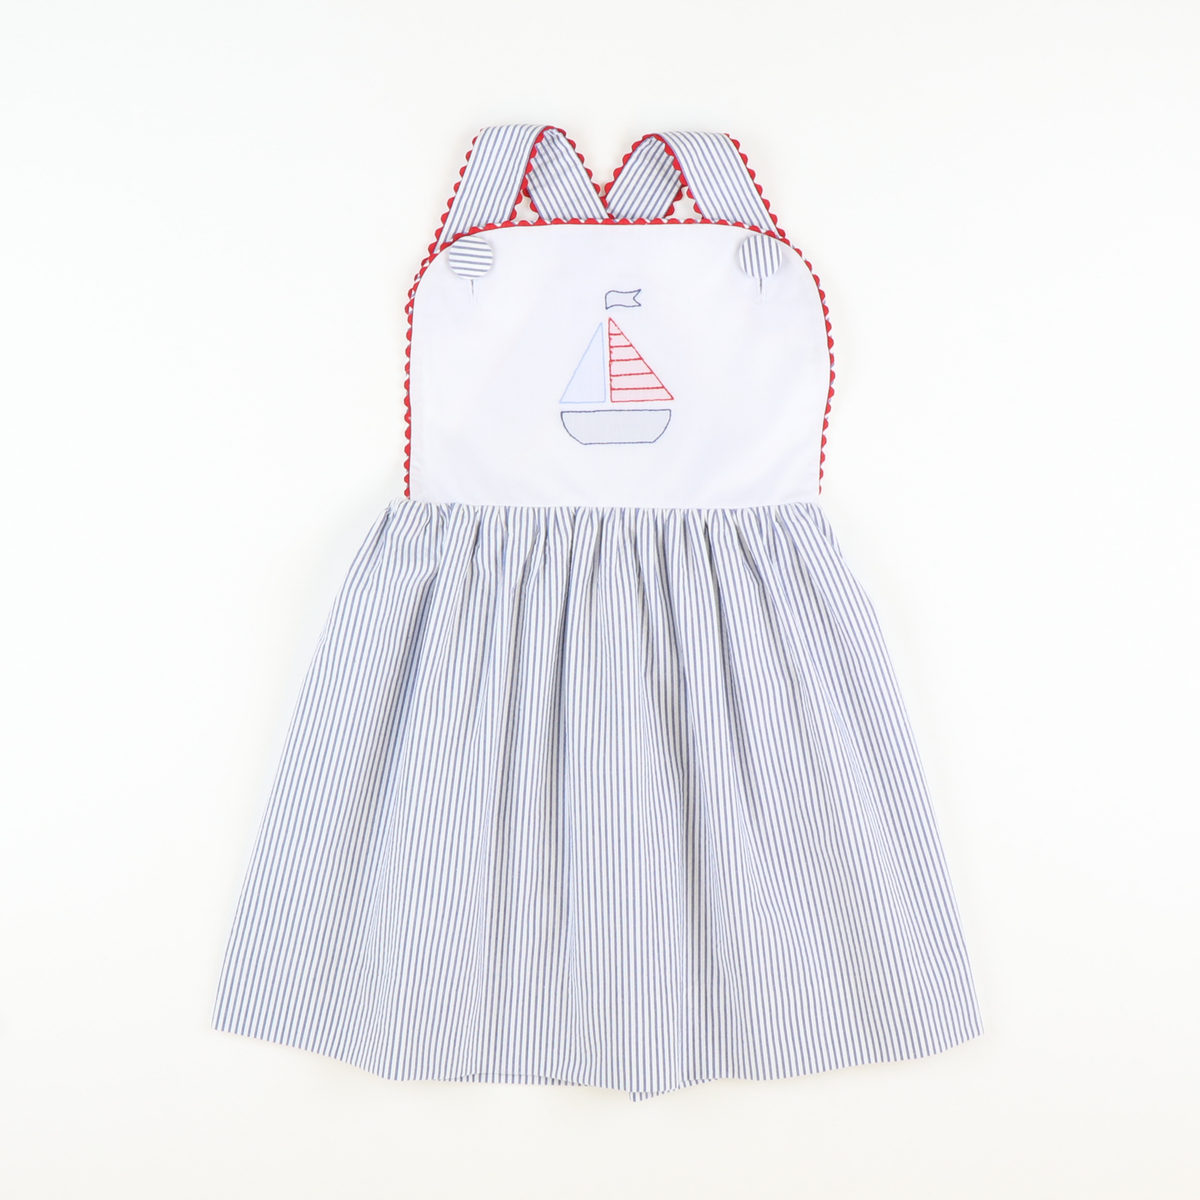 Embroidered Sailboat Dress - Stellybelly